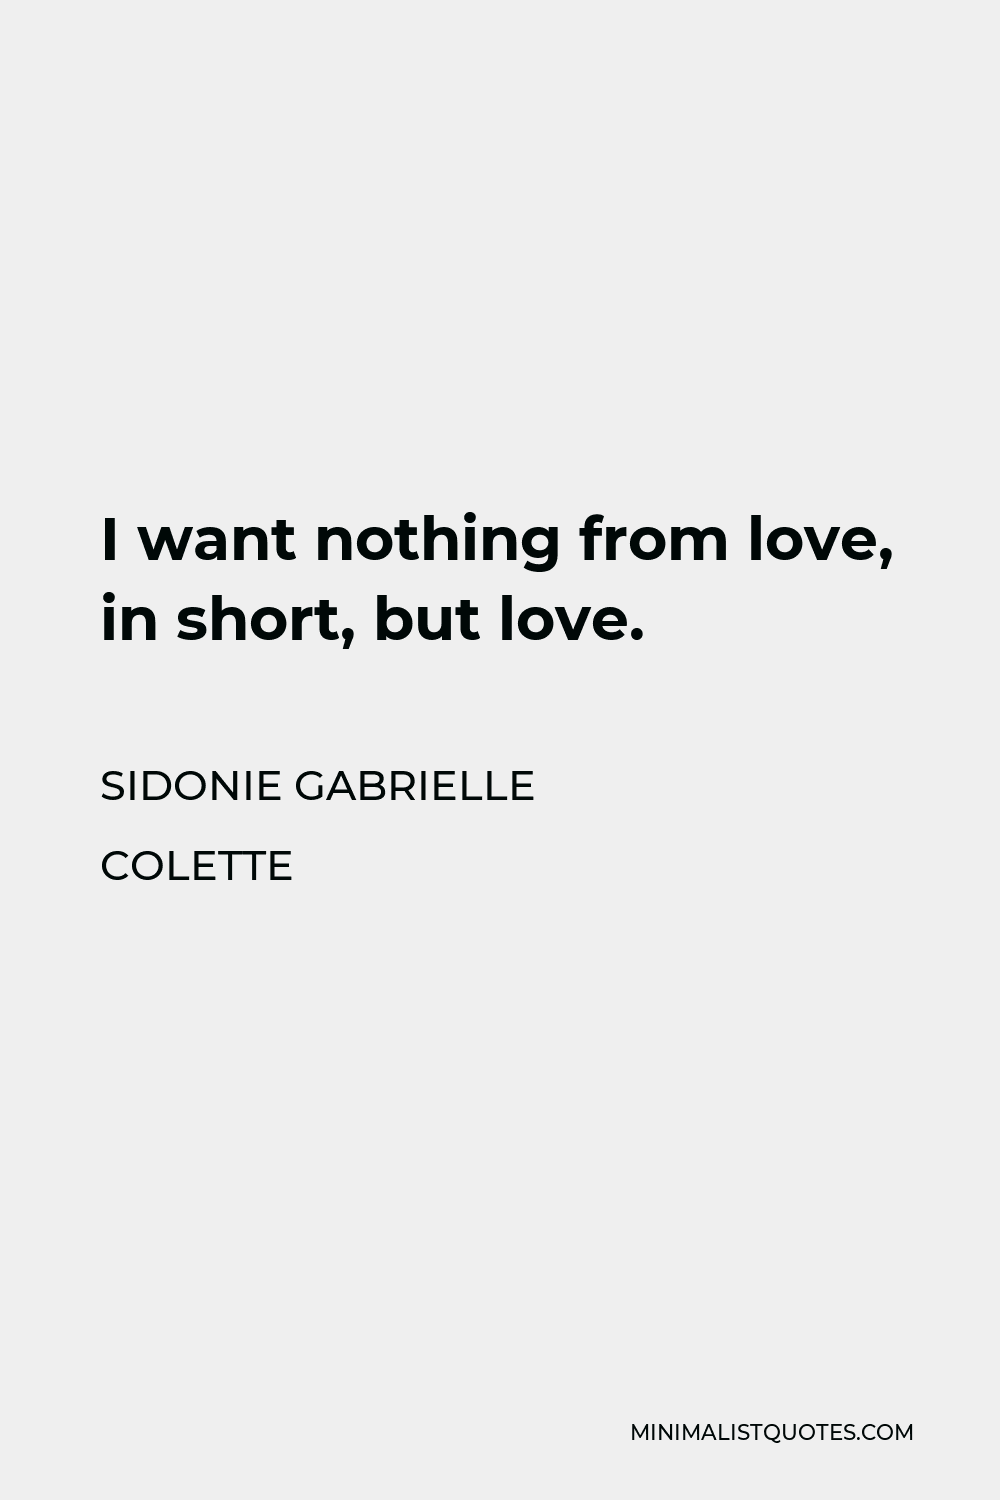 Sidonie Gabrielle Colette Quote - I want nothing from love, in short, but love.